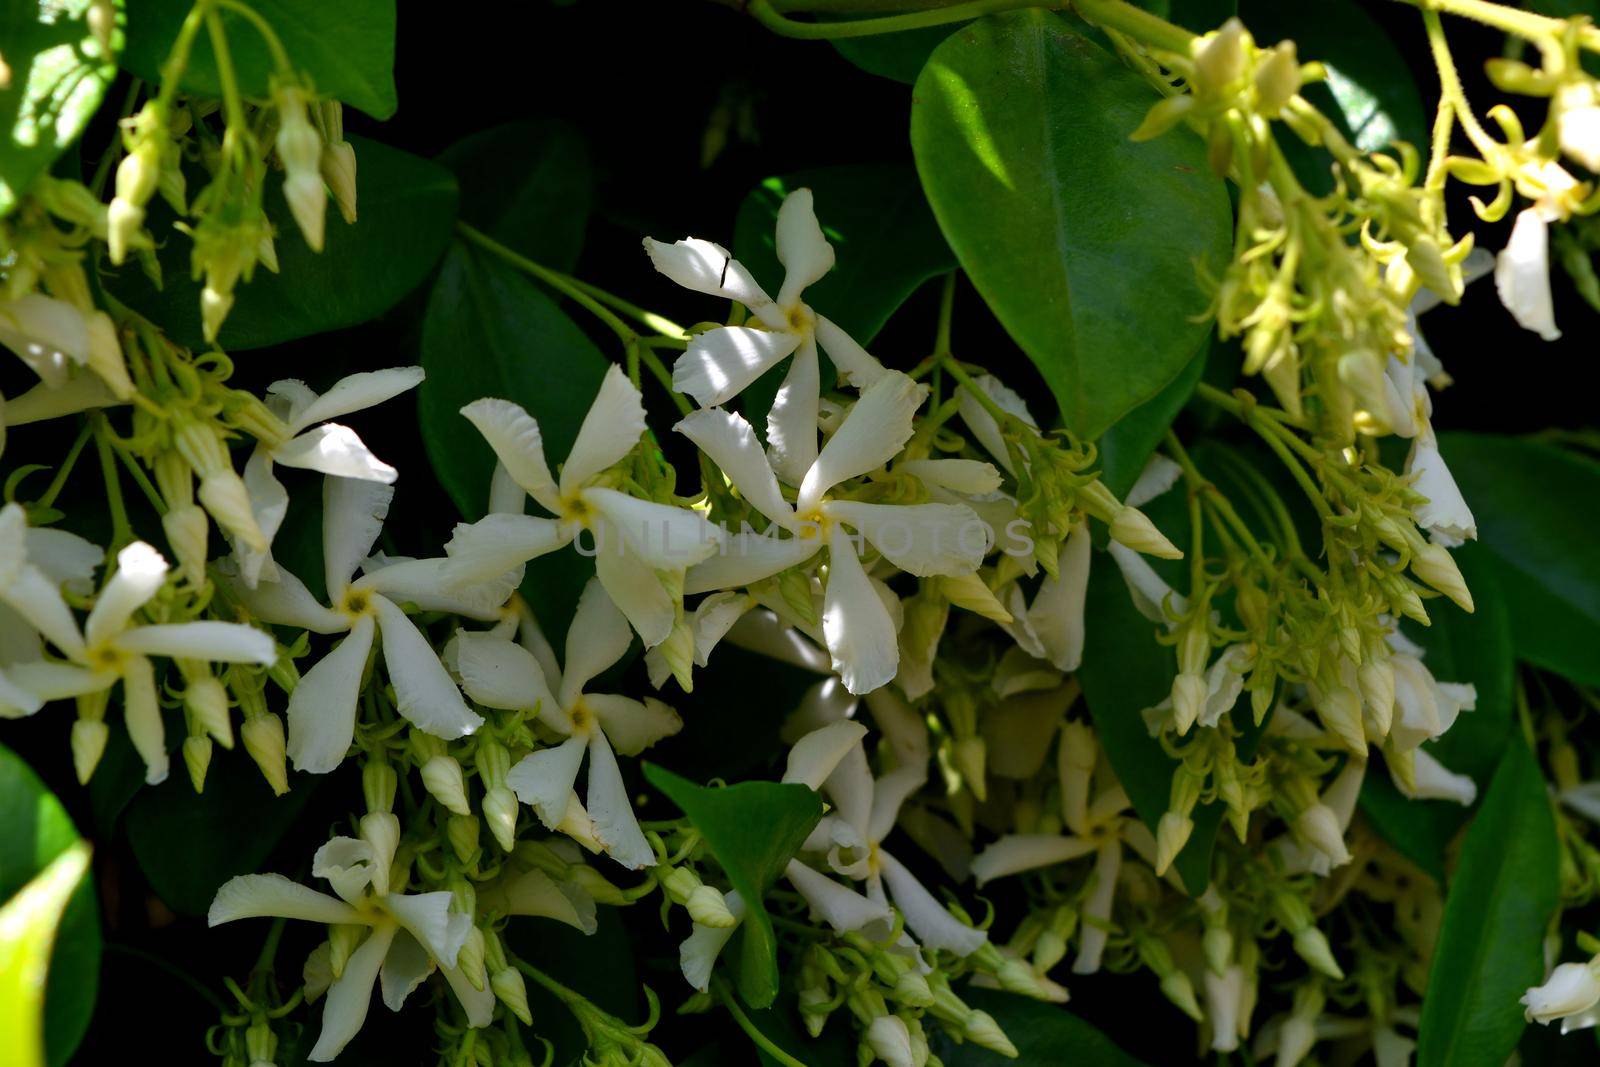 A closeup of freshly blossomed trachelospermum jasminoides flowers by silentstock639